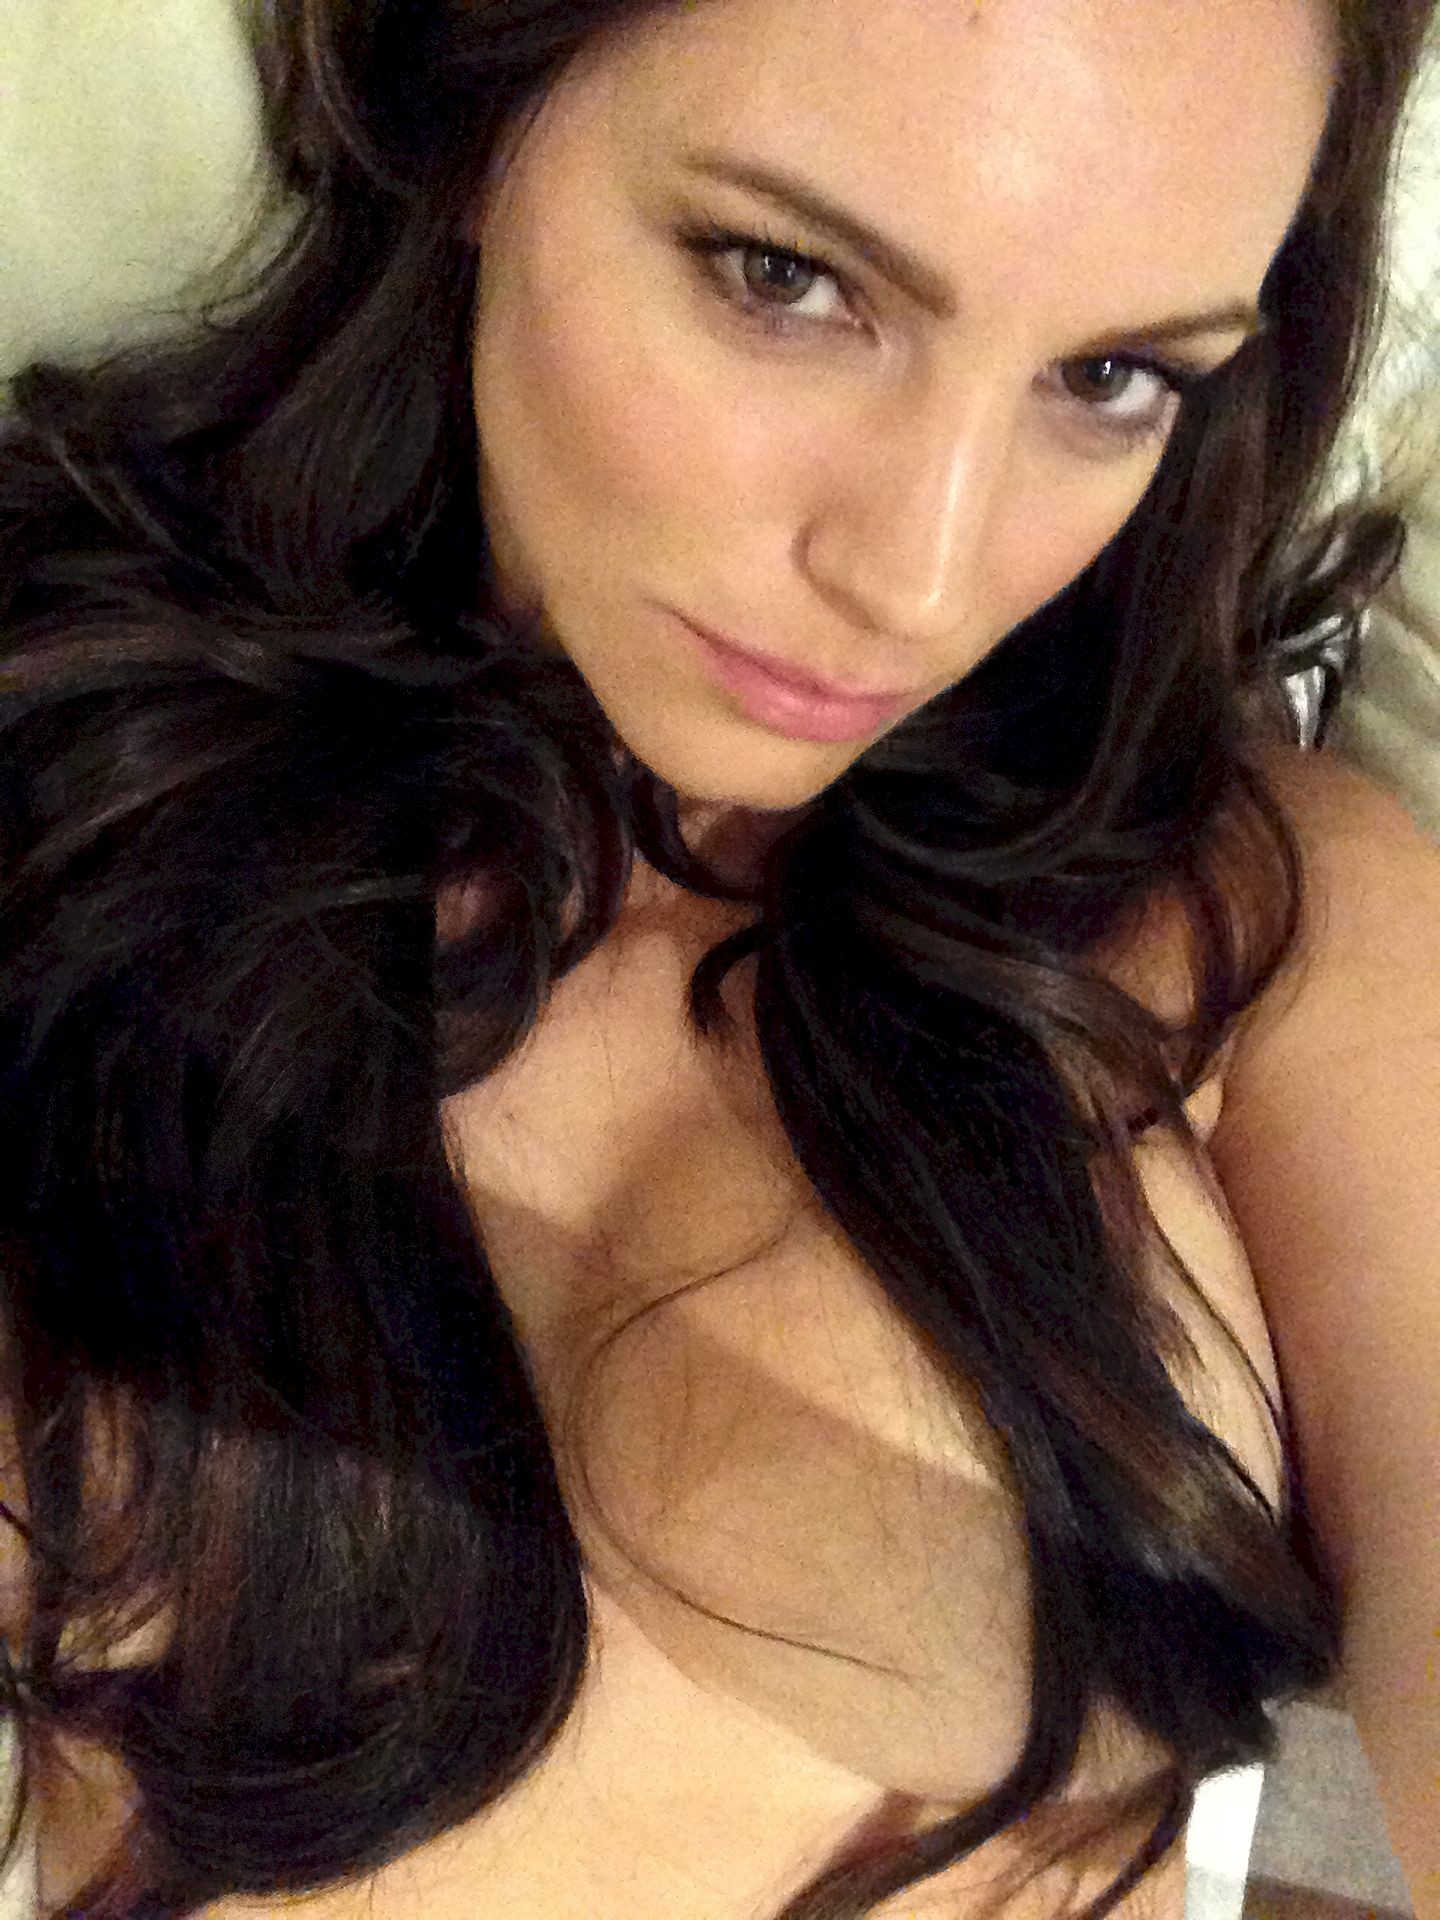 Kelly Brook Leaked The Fappening Pro 2 - Kelly Brook Leaked (2 New Photos)